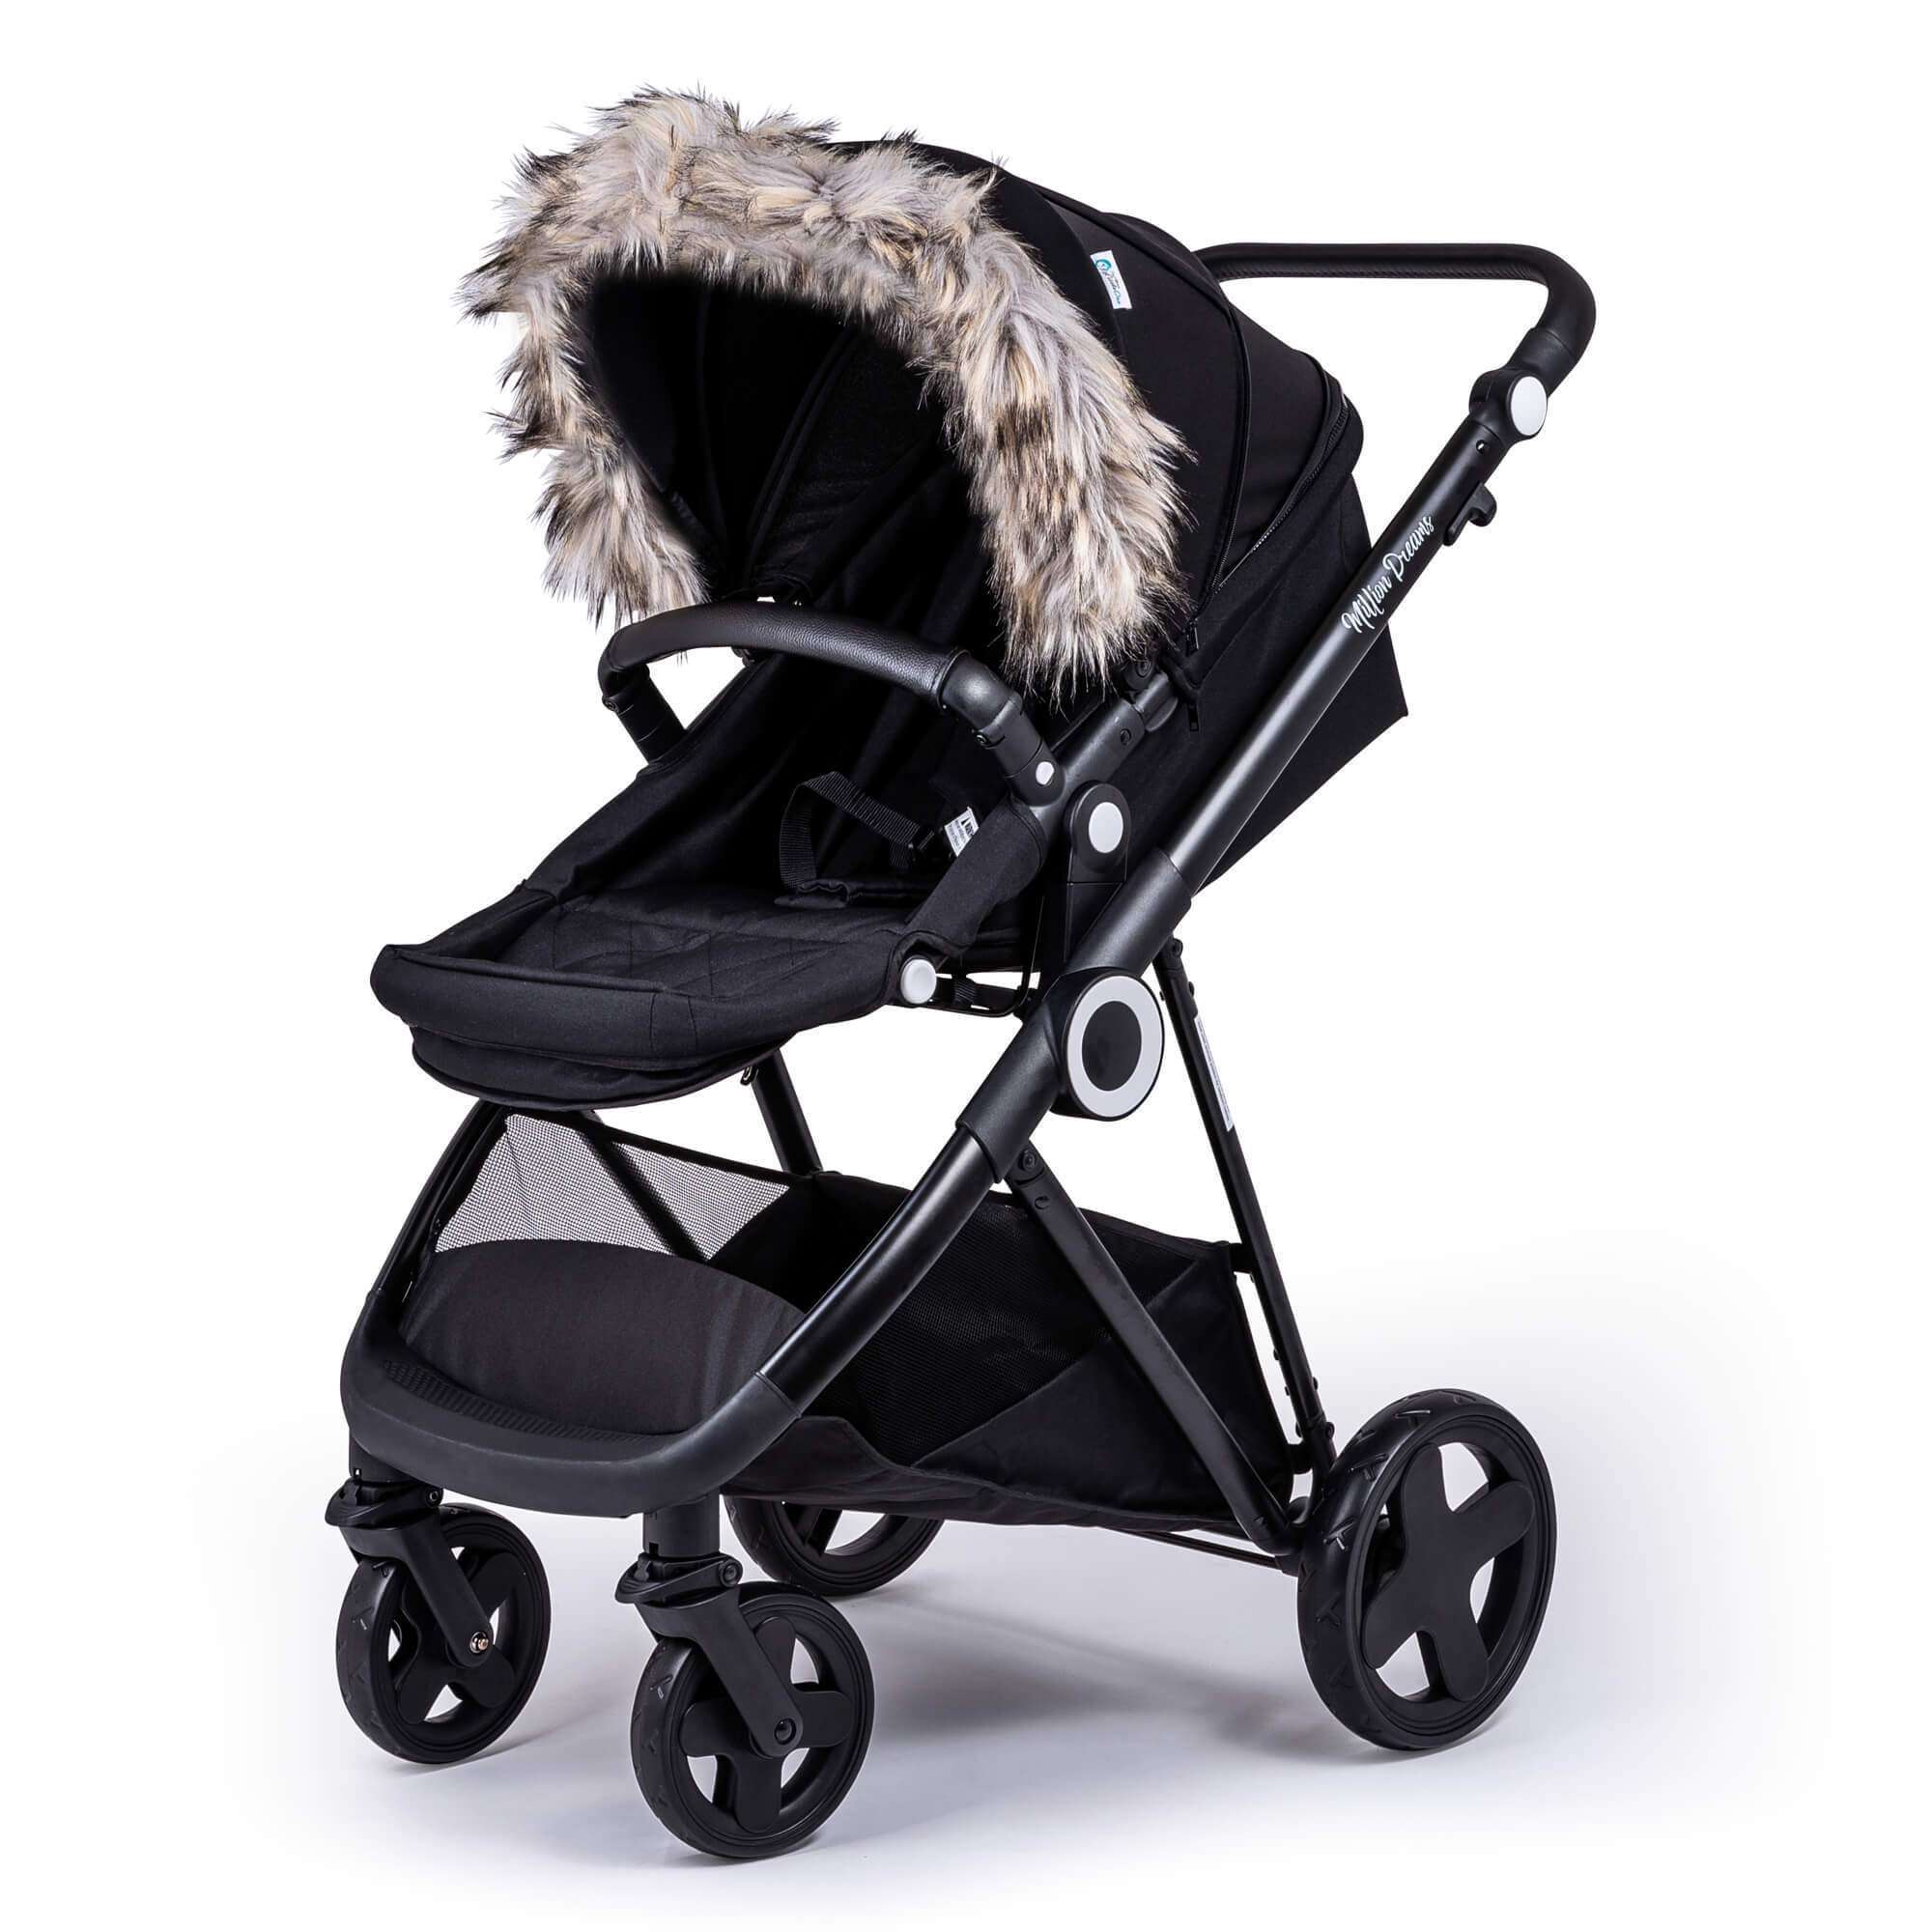 Pram Fur Hood Trim Attachment for Pushchair Compatible with BOB - For Your Little One